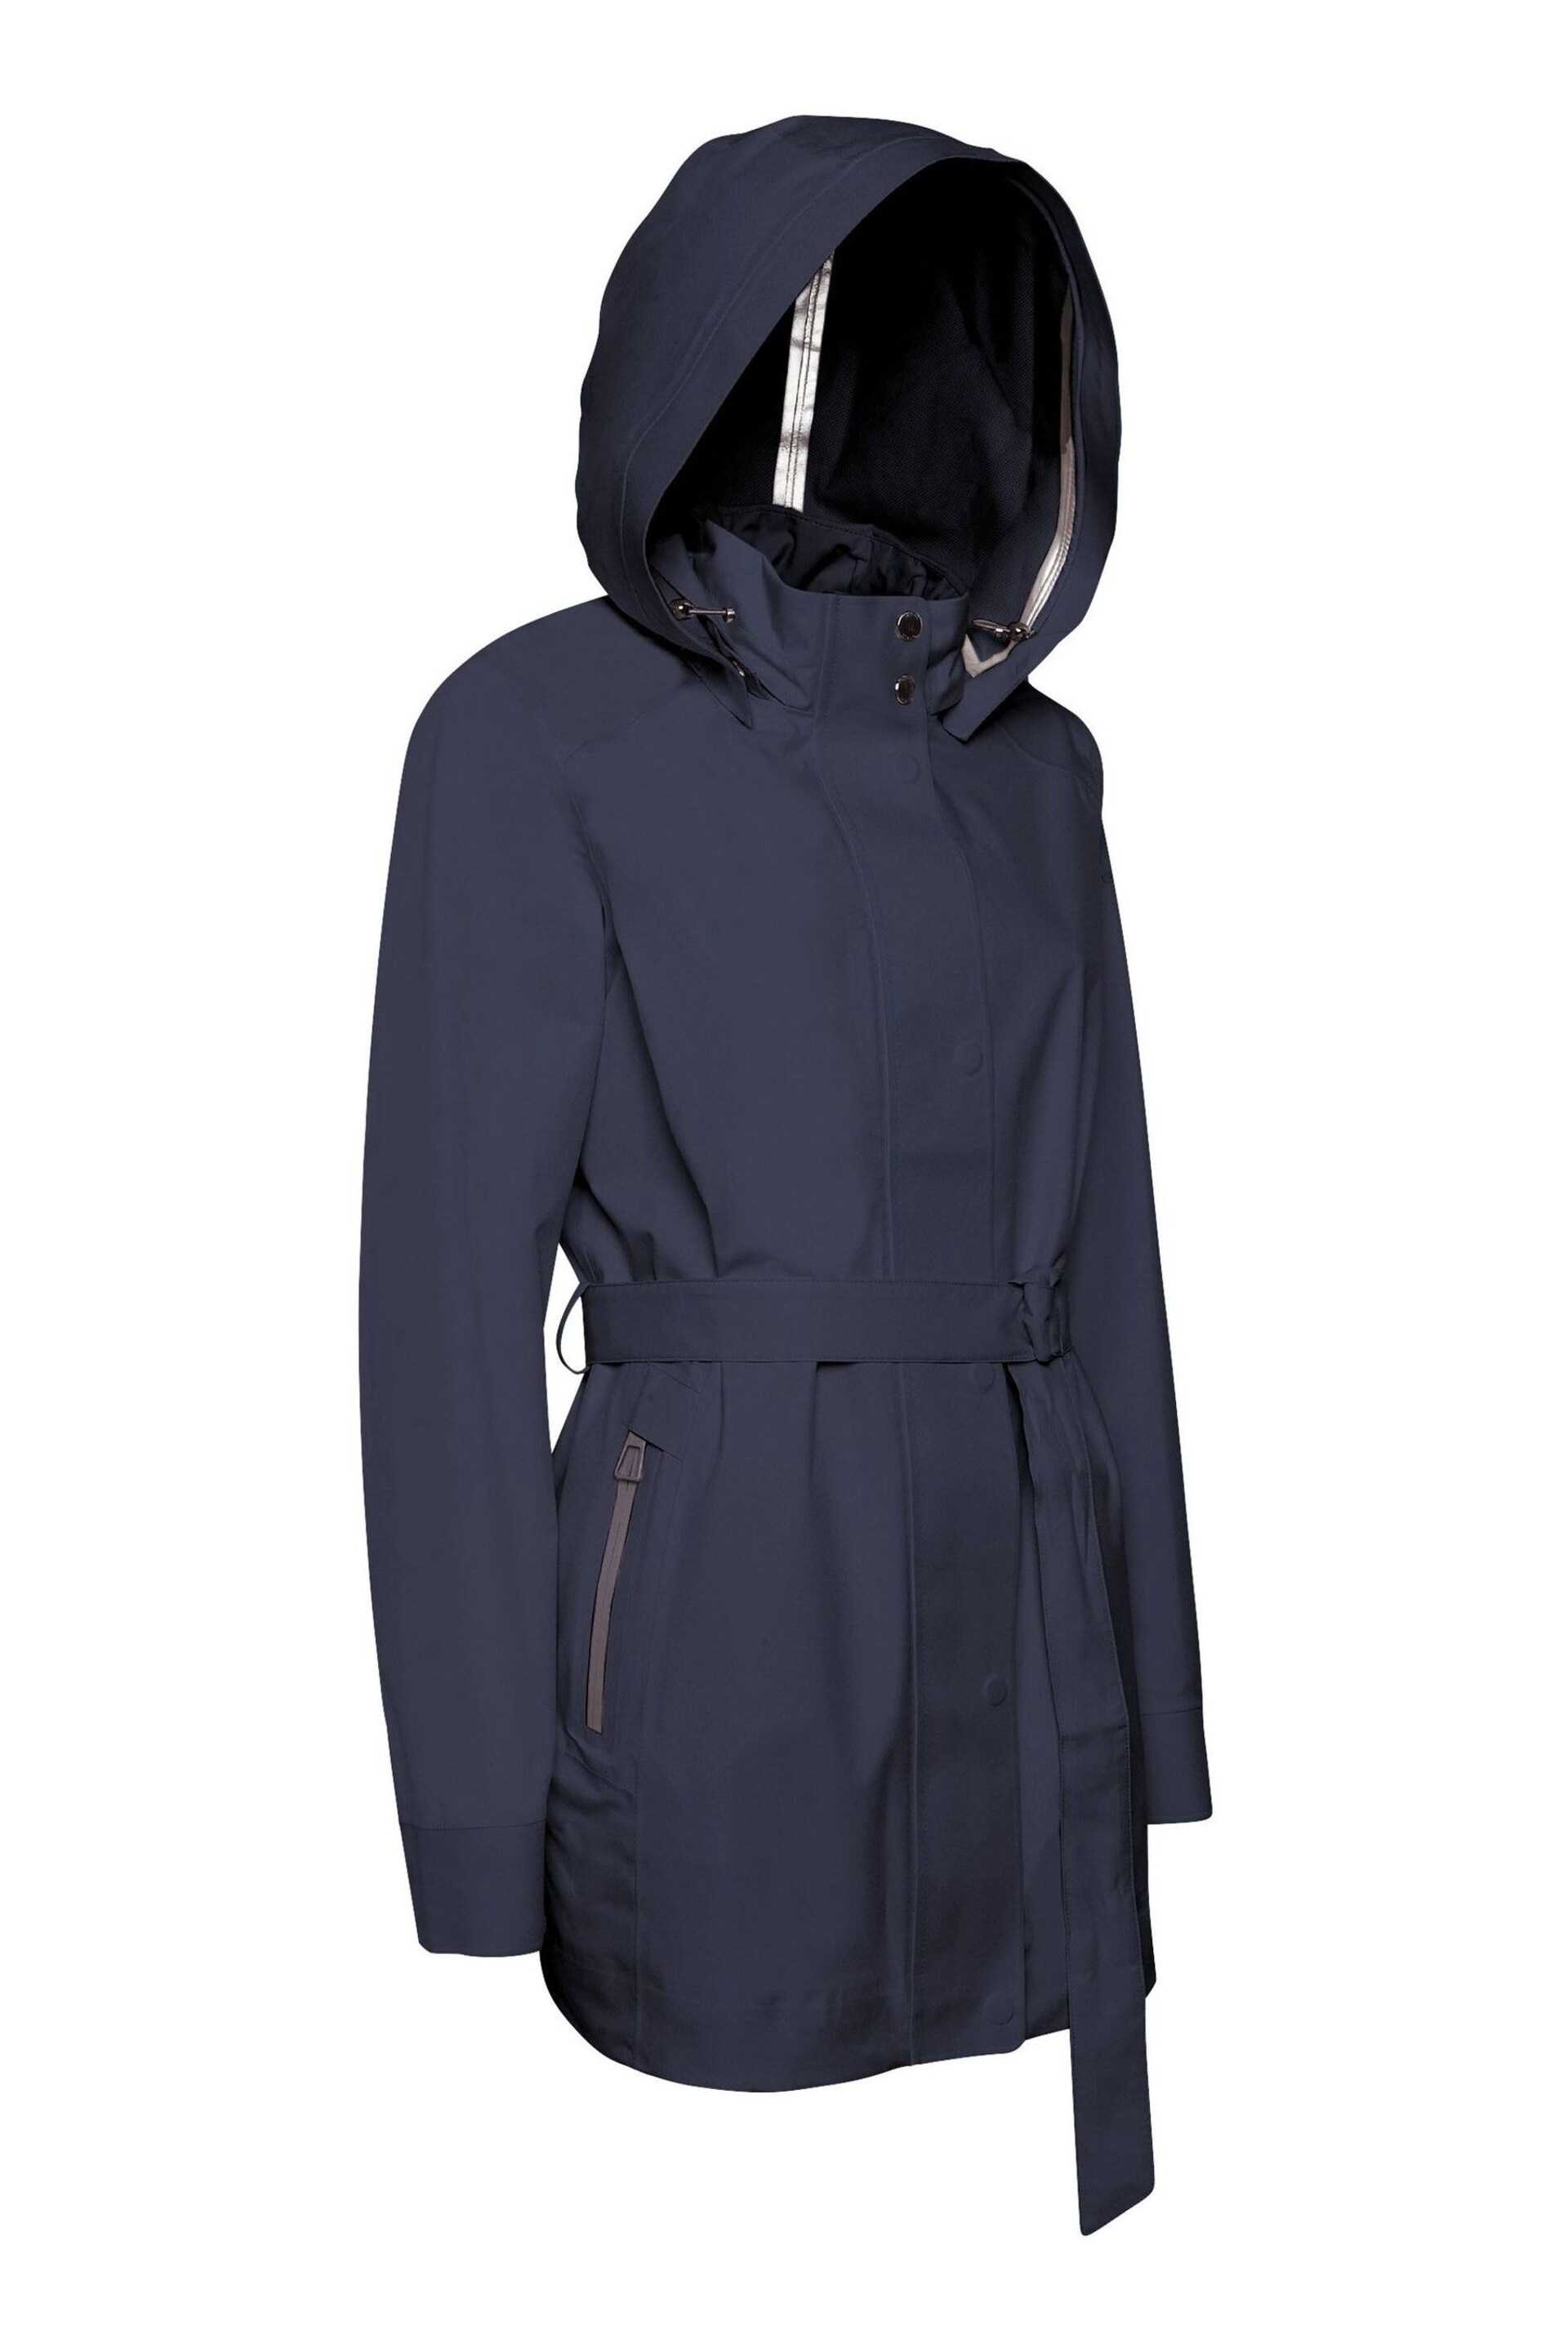 Geox Womens Blue Gendry Jacket - Image 3 of 6